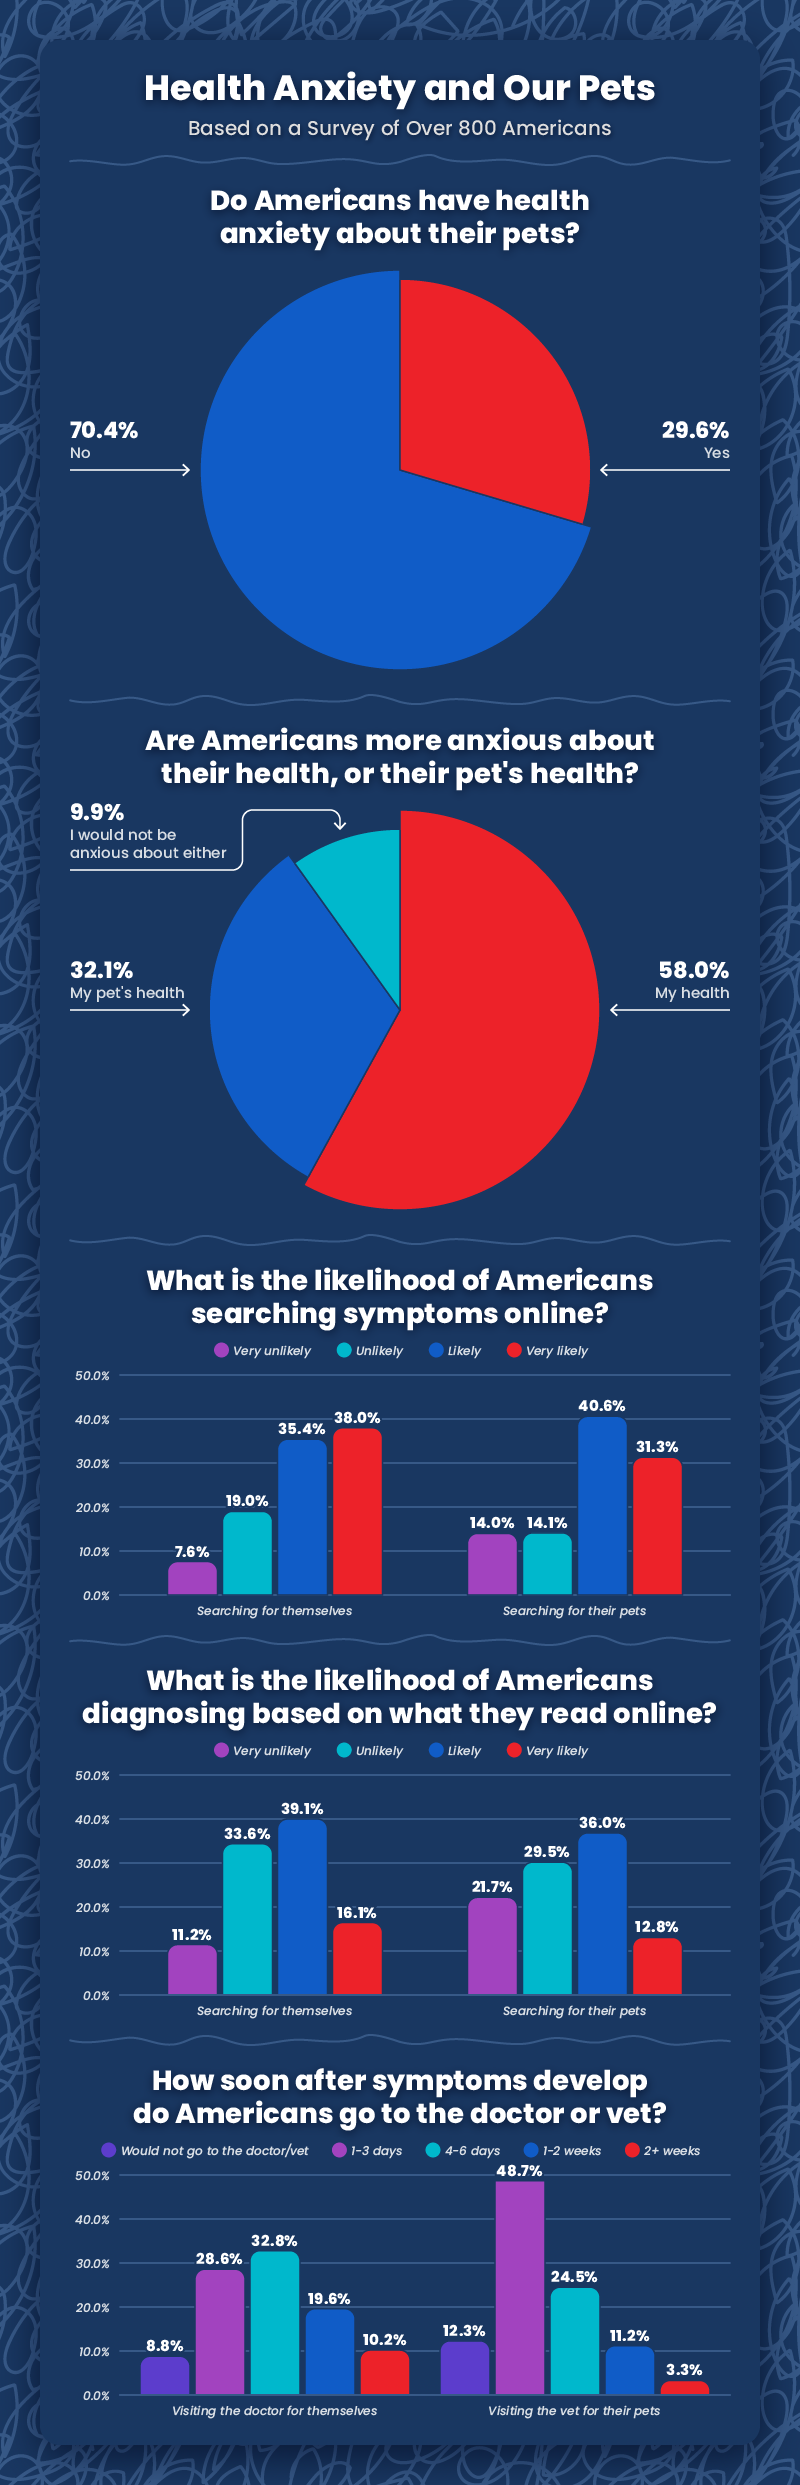 Charts comparing how Americans feel about their own health anxiety versus their pets’